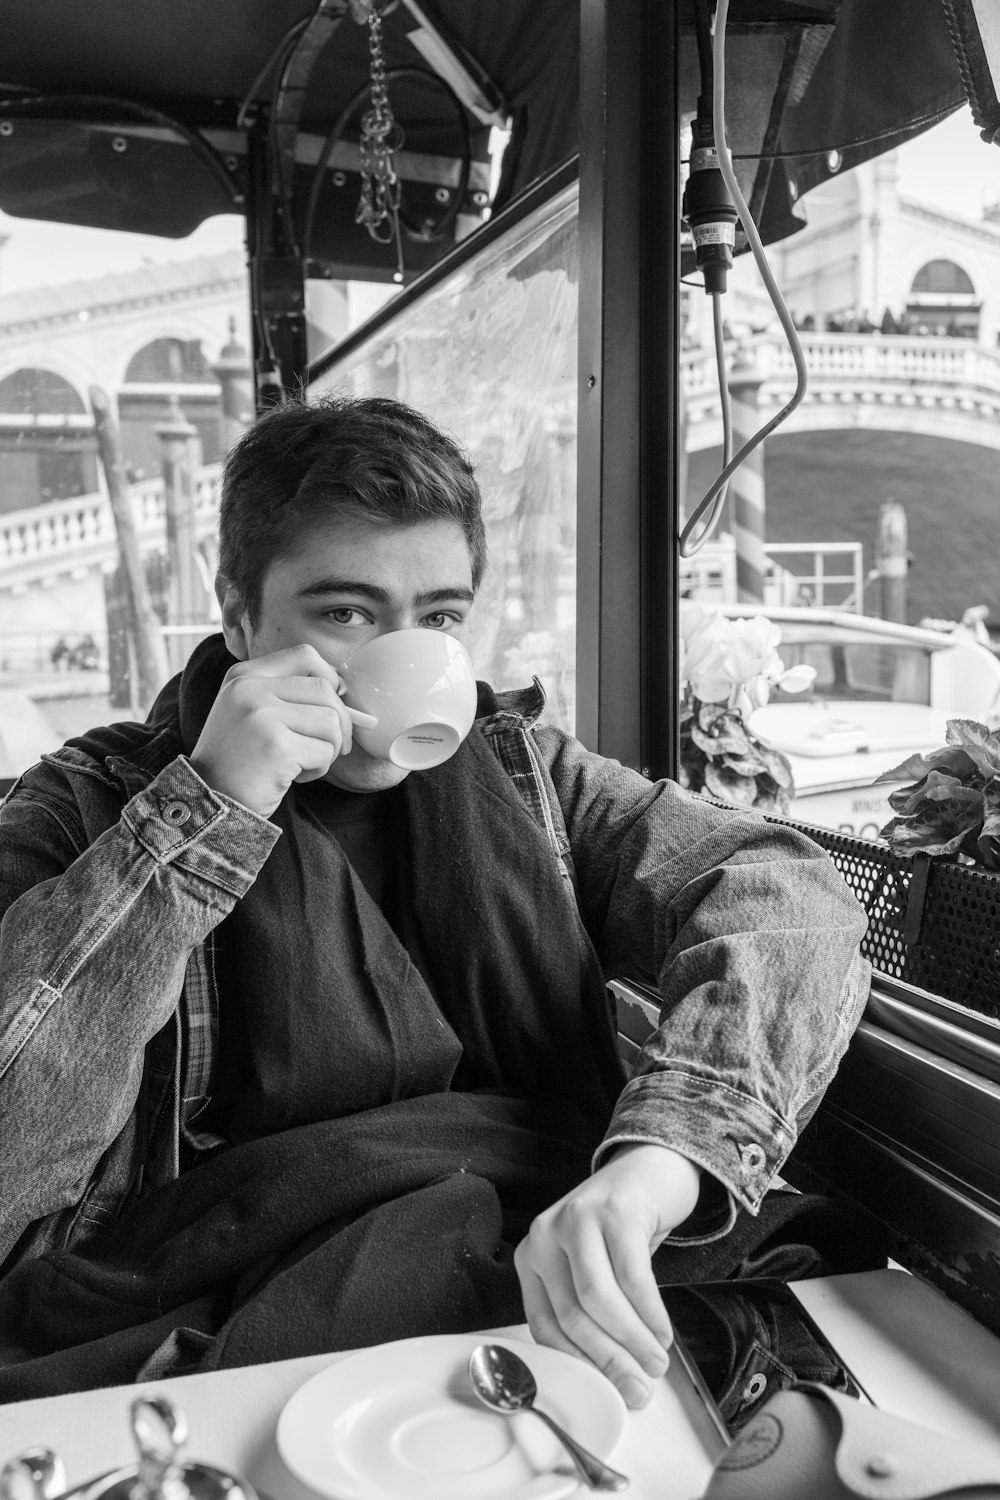 a man sitting on a bus drinking a cup of coffee